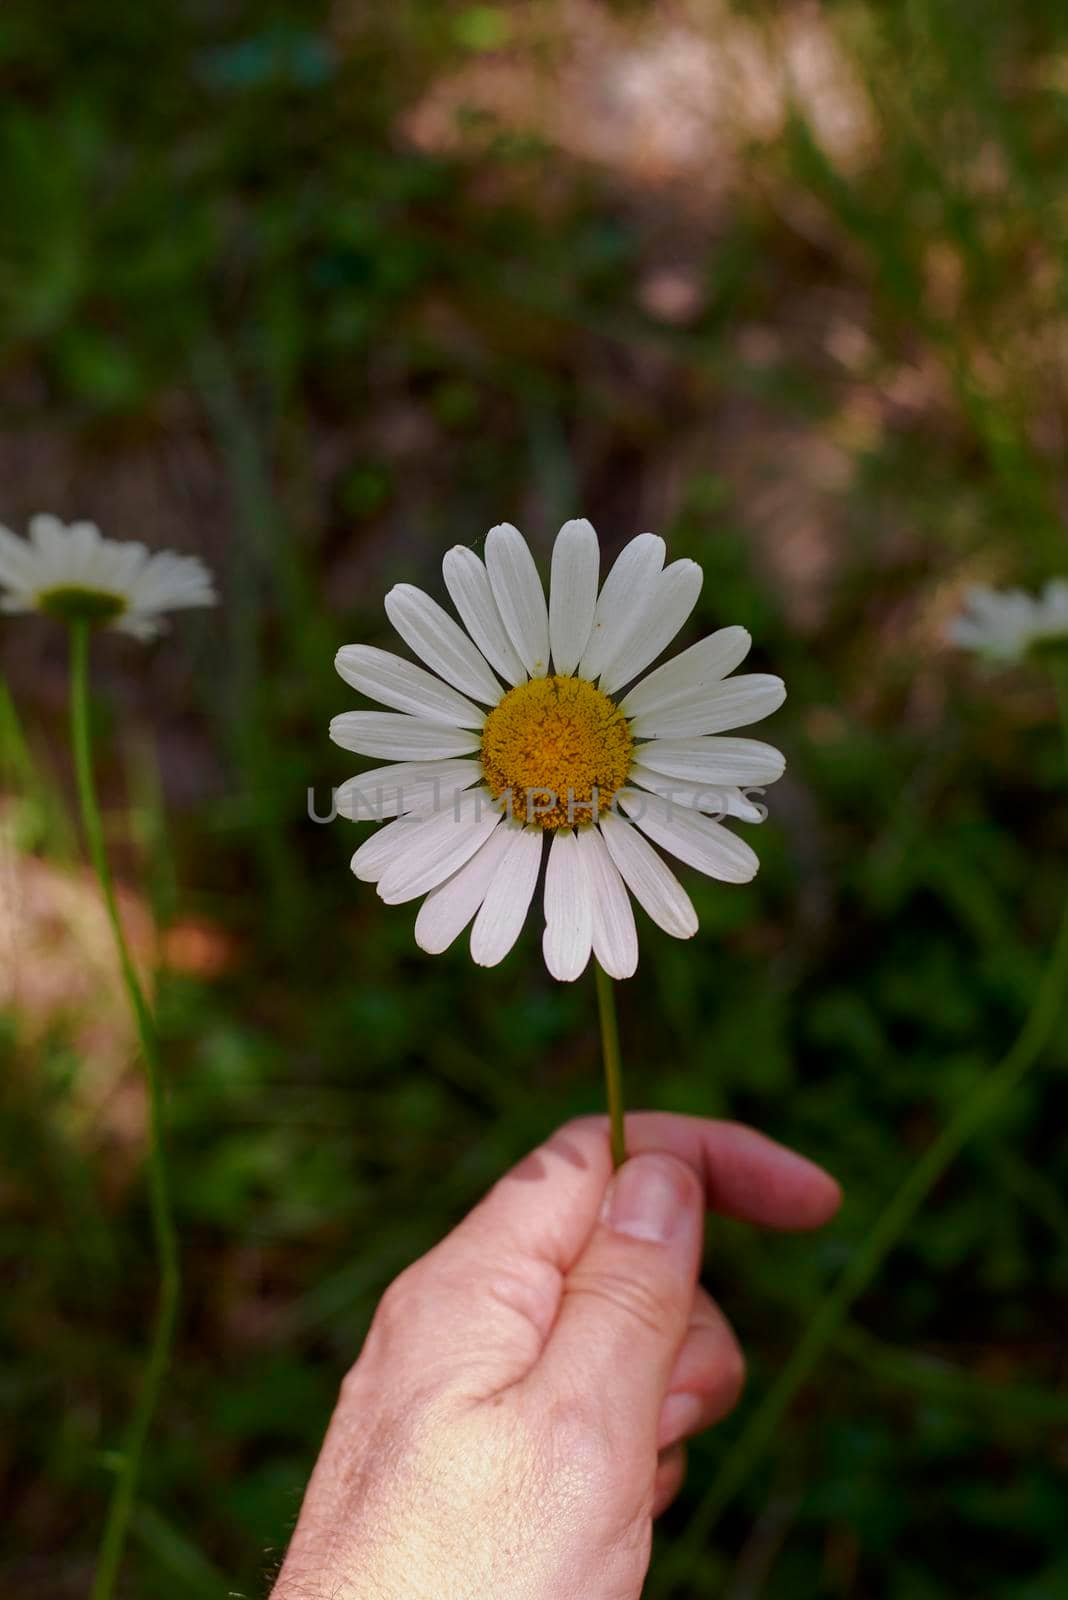 Hand holding a daisy flower with stem. Unfocused background and green, front view, no contrast, yellow and white.